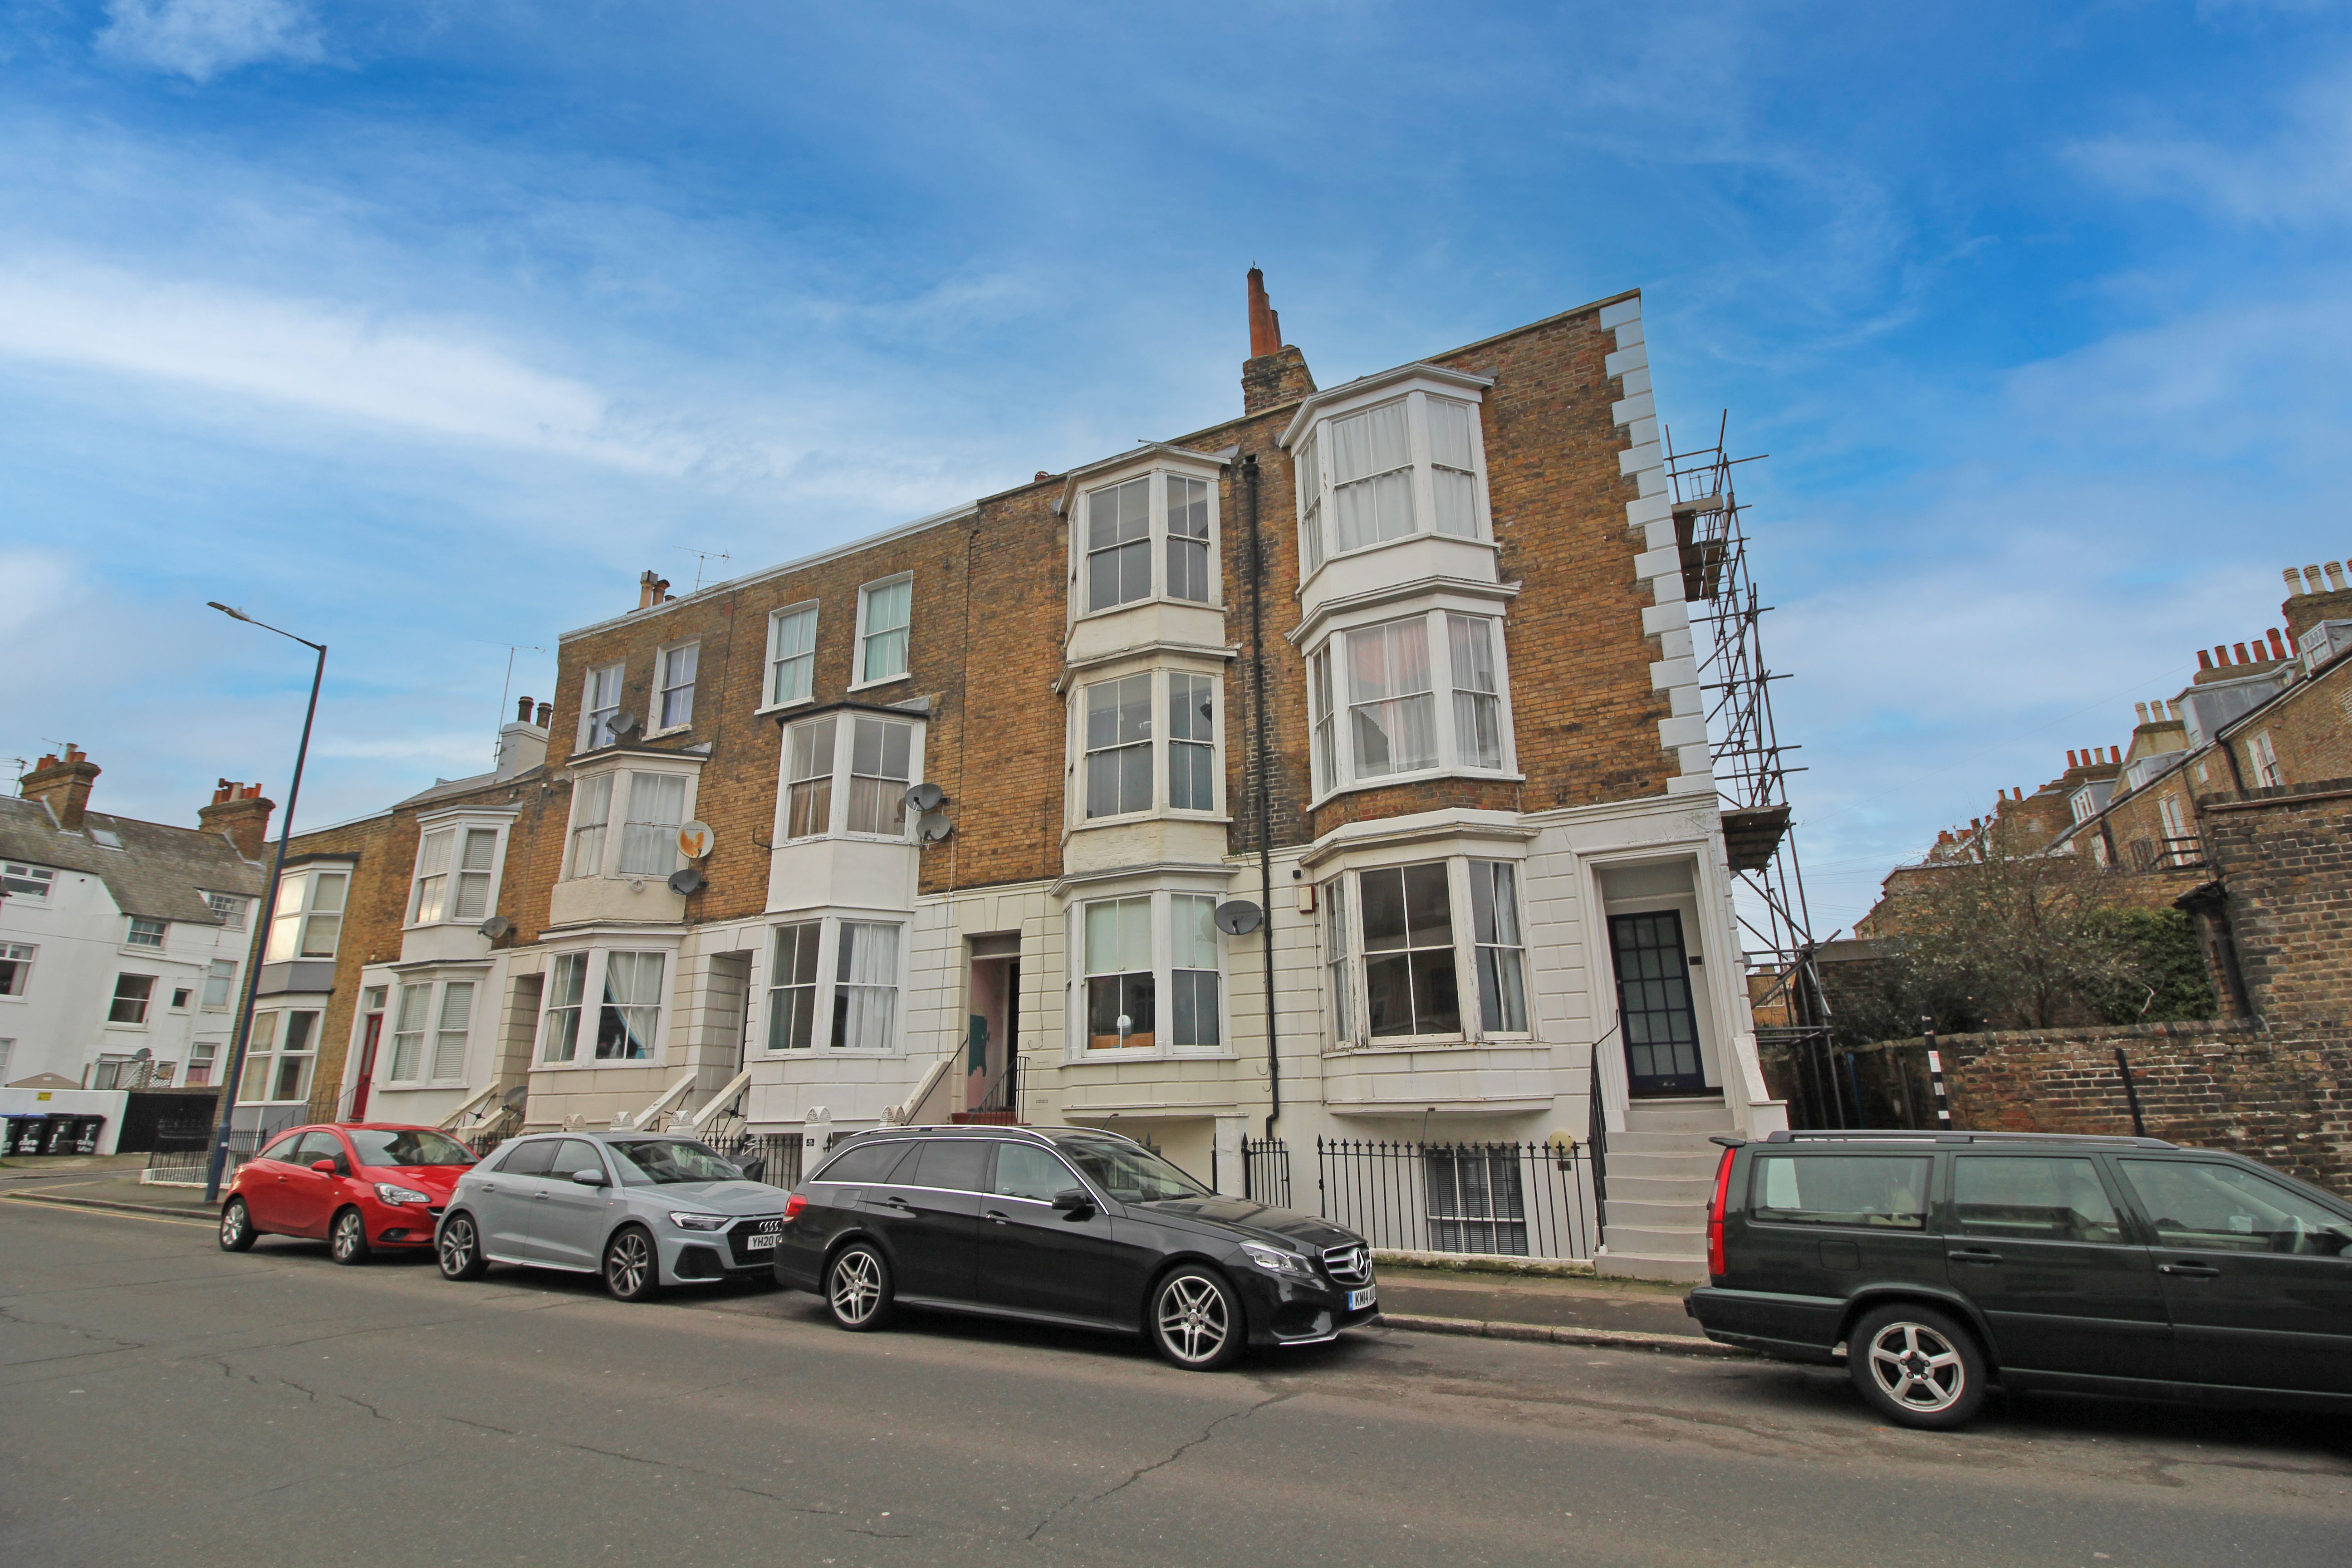 3 bed maisonette to rent in St Augustines Road, Ramsgate - Property Image 1